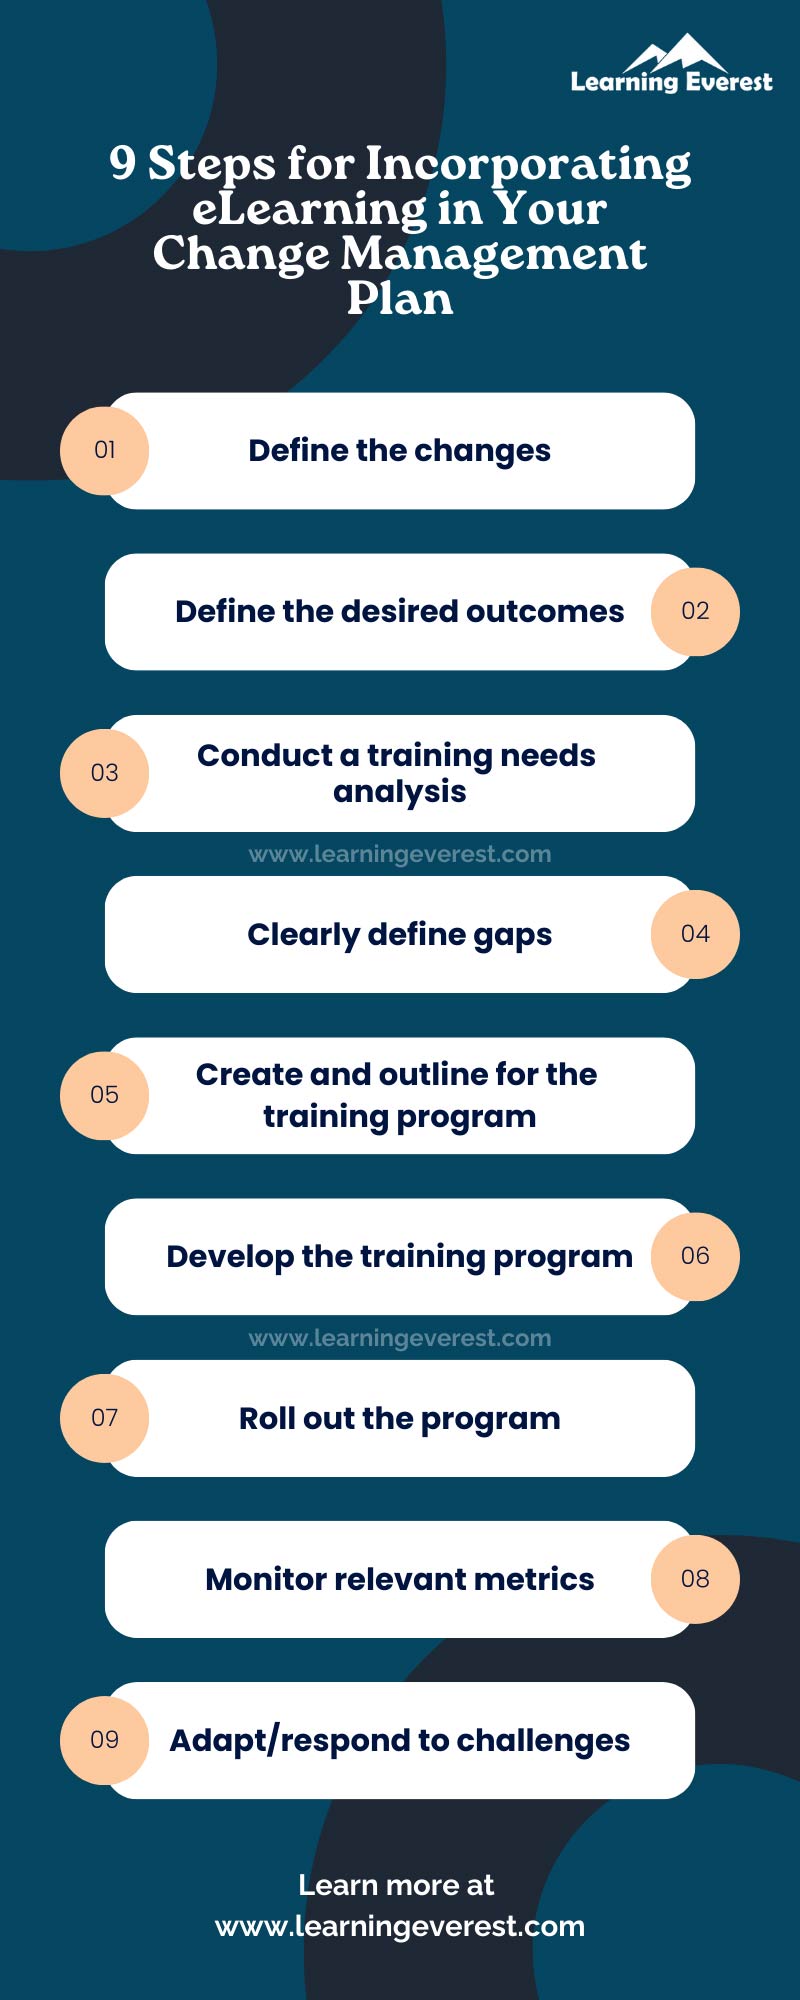 9 Steps for Incorporating eLearning in Your Change Management Plan - Infographic